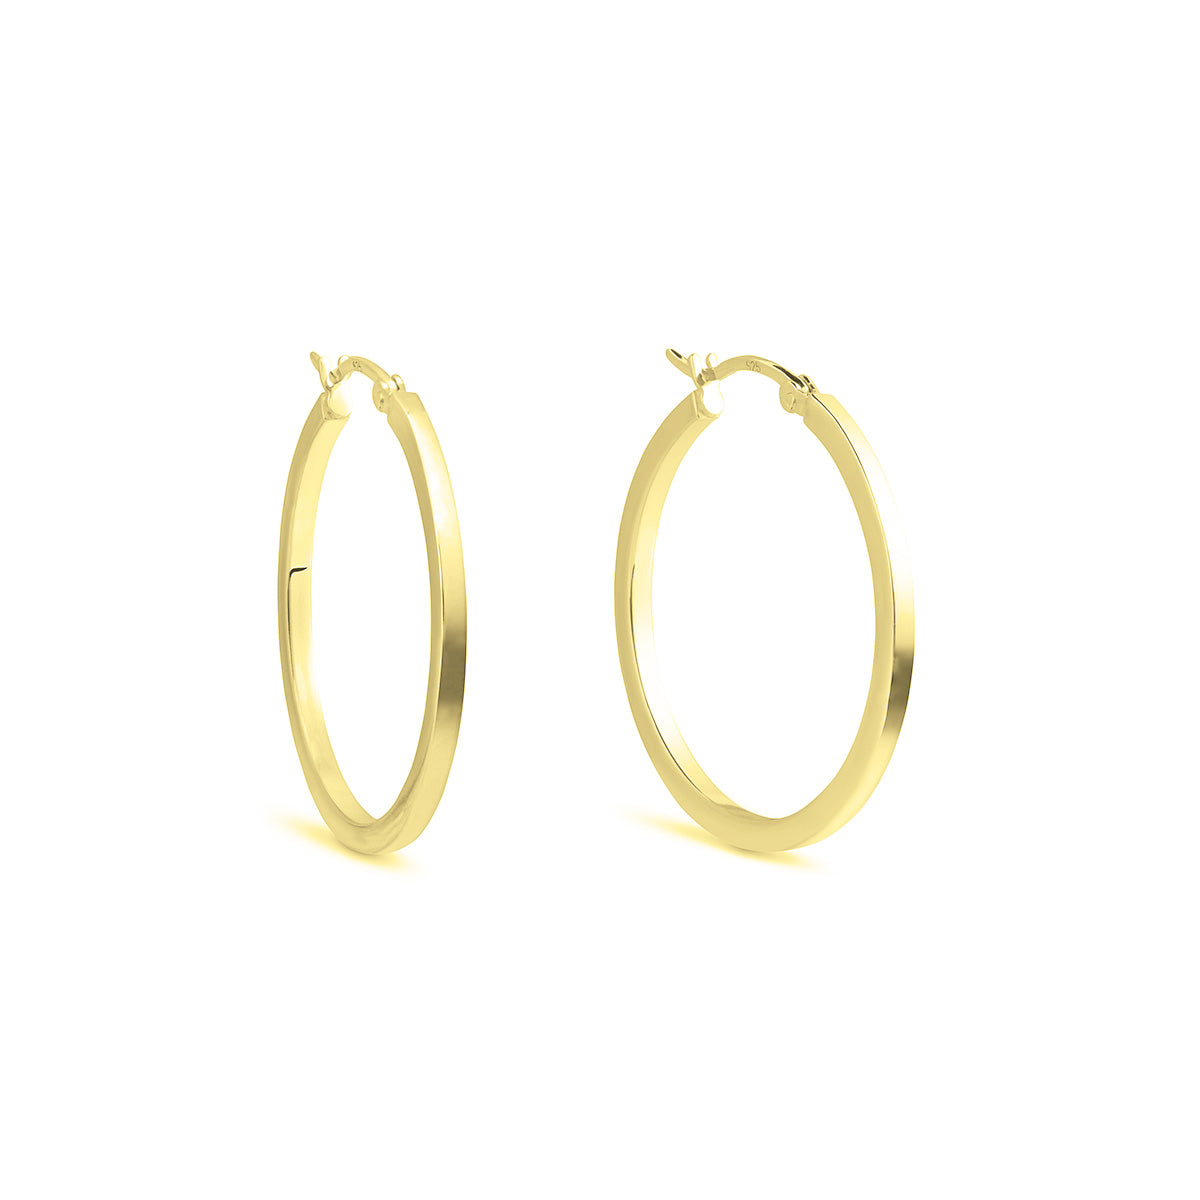 Sterling Silver and 22c Gold Plate Square Edge Hoops - Small | Hersey & Son Silversmiths